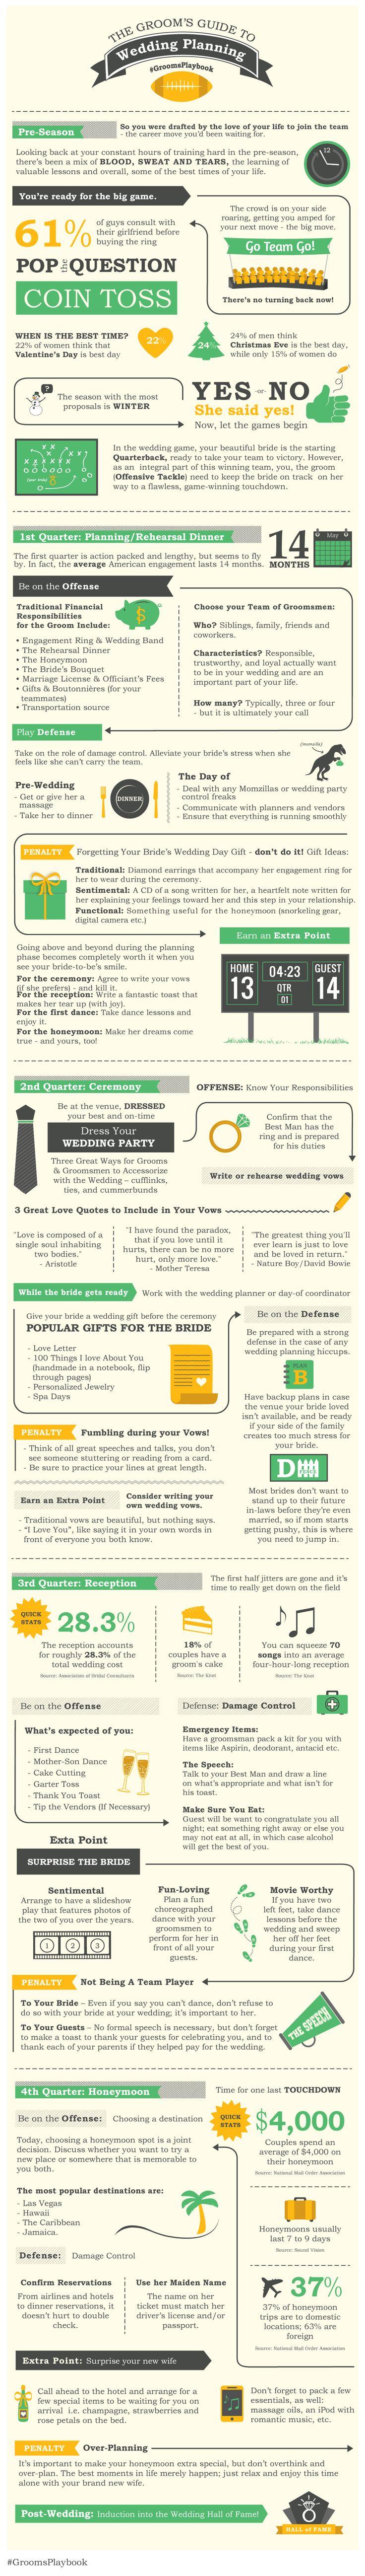 Hochzeit - The Grooms Guide To Wedding Planning [Infographic]